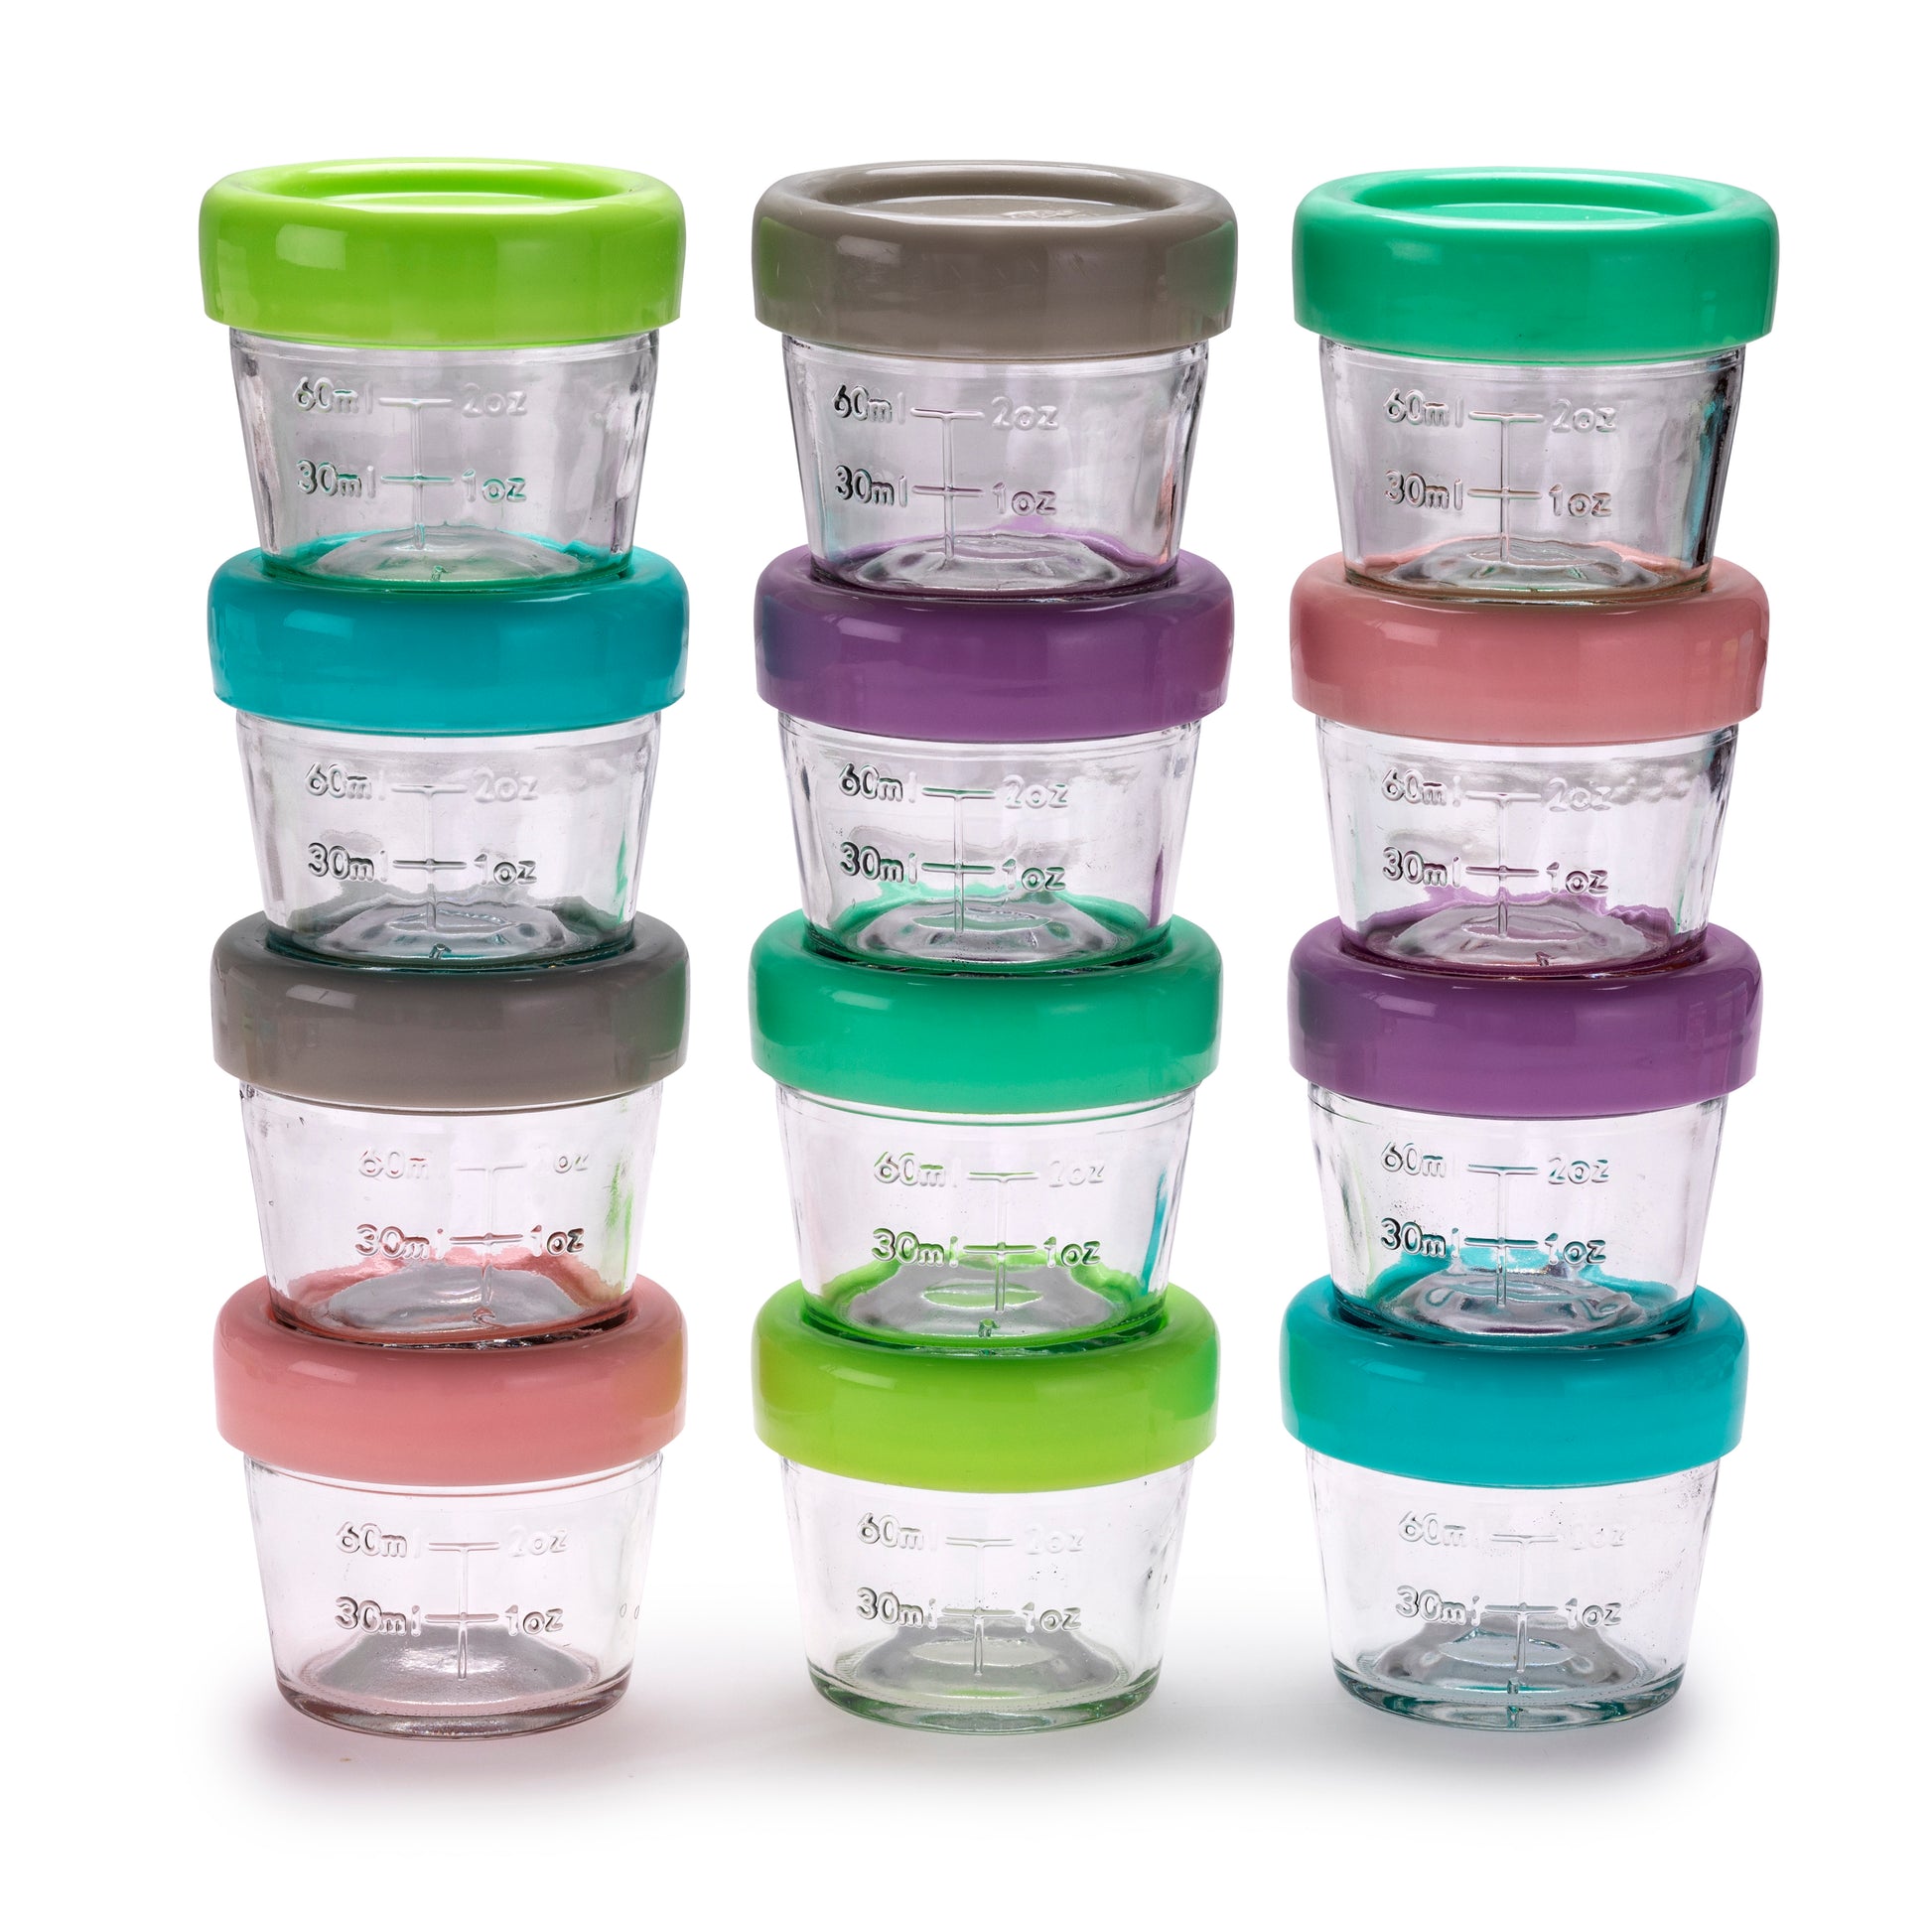 melii Glass Baby Food Containers - Airtight, Leakproof, Storage for Babies, Toddlers, Kids – BPA Free, Microwave & Freezer Safe - Set of 12, 4oz with Easy Open Lids